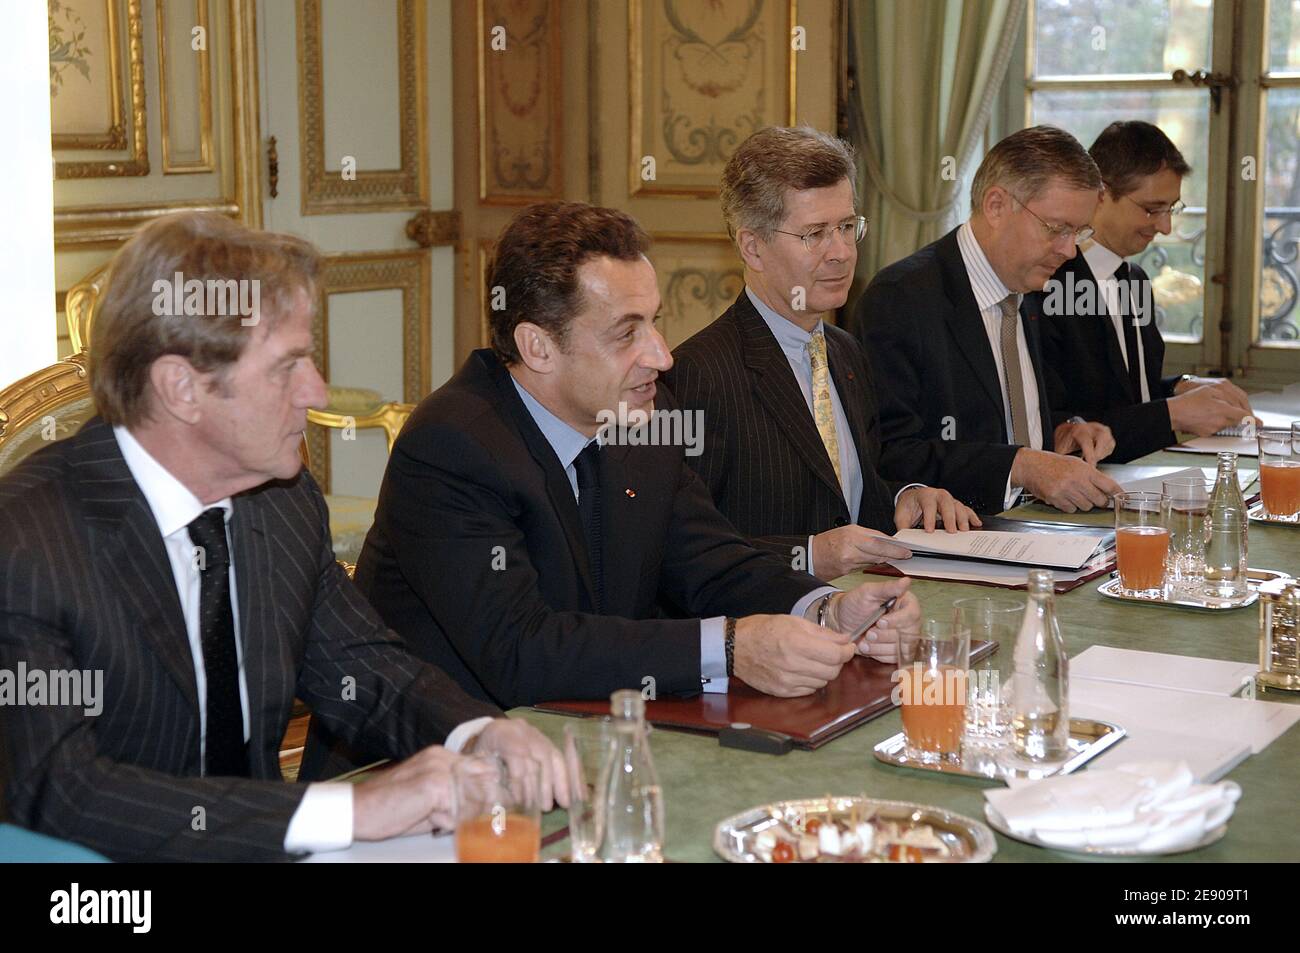 President Nicolas Sarkozy receives EU foreign policy chief Javier Solana at the Elysee Palace in Paris, France on November 23, 2007. Solana declared yesterday that he would probably meet, 30th November in London, with Iranian top nuclear negotiator Saeed Jalili. Photo by Giancarlo Gorassini/ABACAPRESS.COM Stock Photo